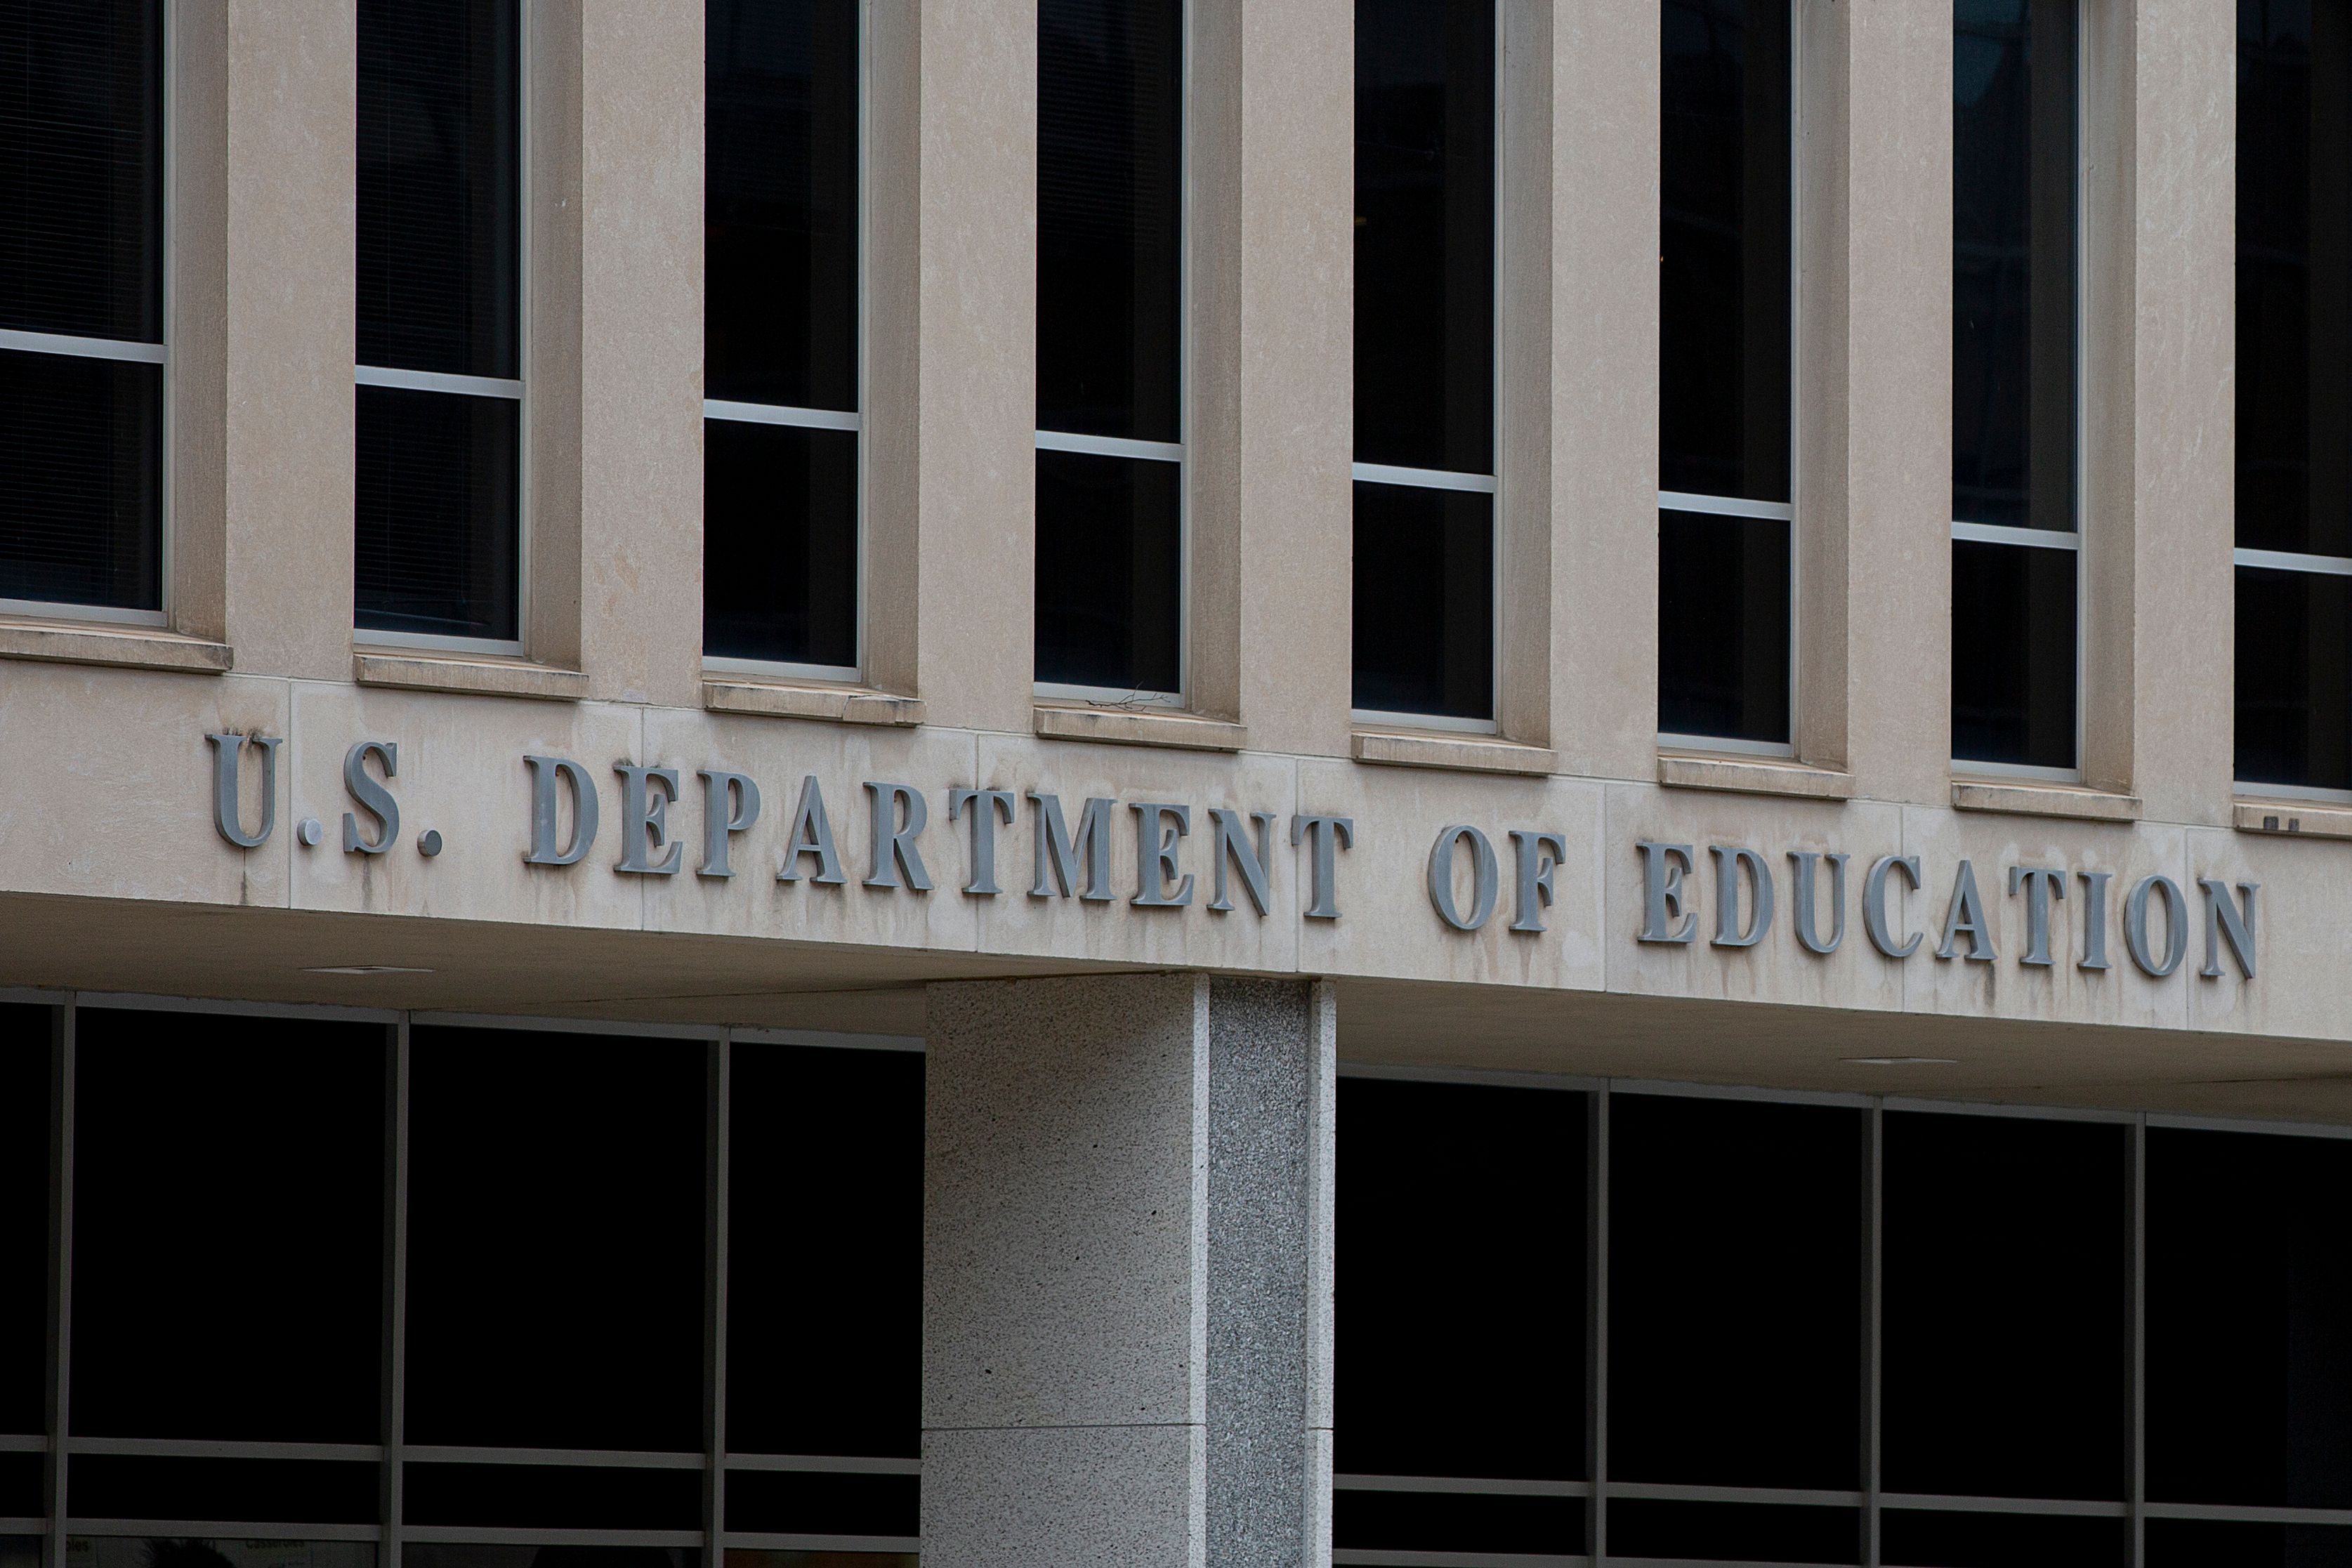 The US Department of Education building building is seen in Washington, DC, on July 22, 2019. (Photo by Alastair Pike / AFP) (Photo credit should read ALASTAIR PIKE/AFP/Getty Images)